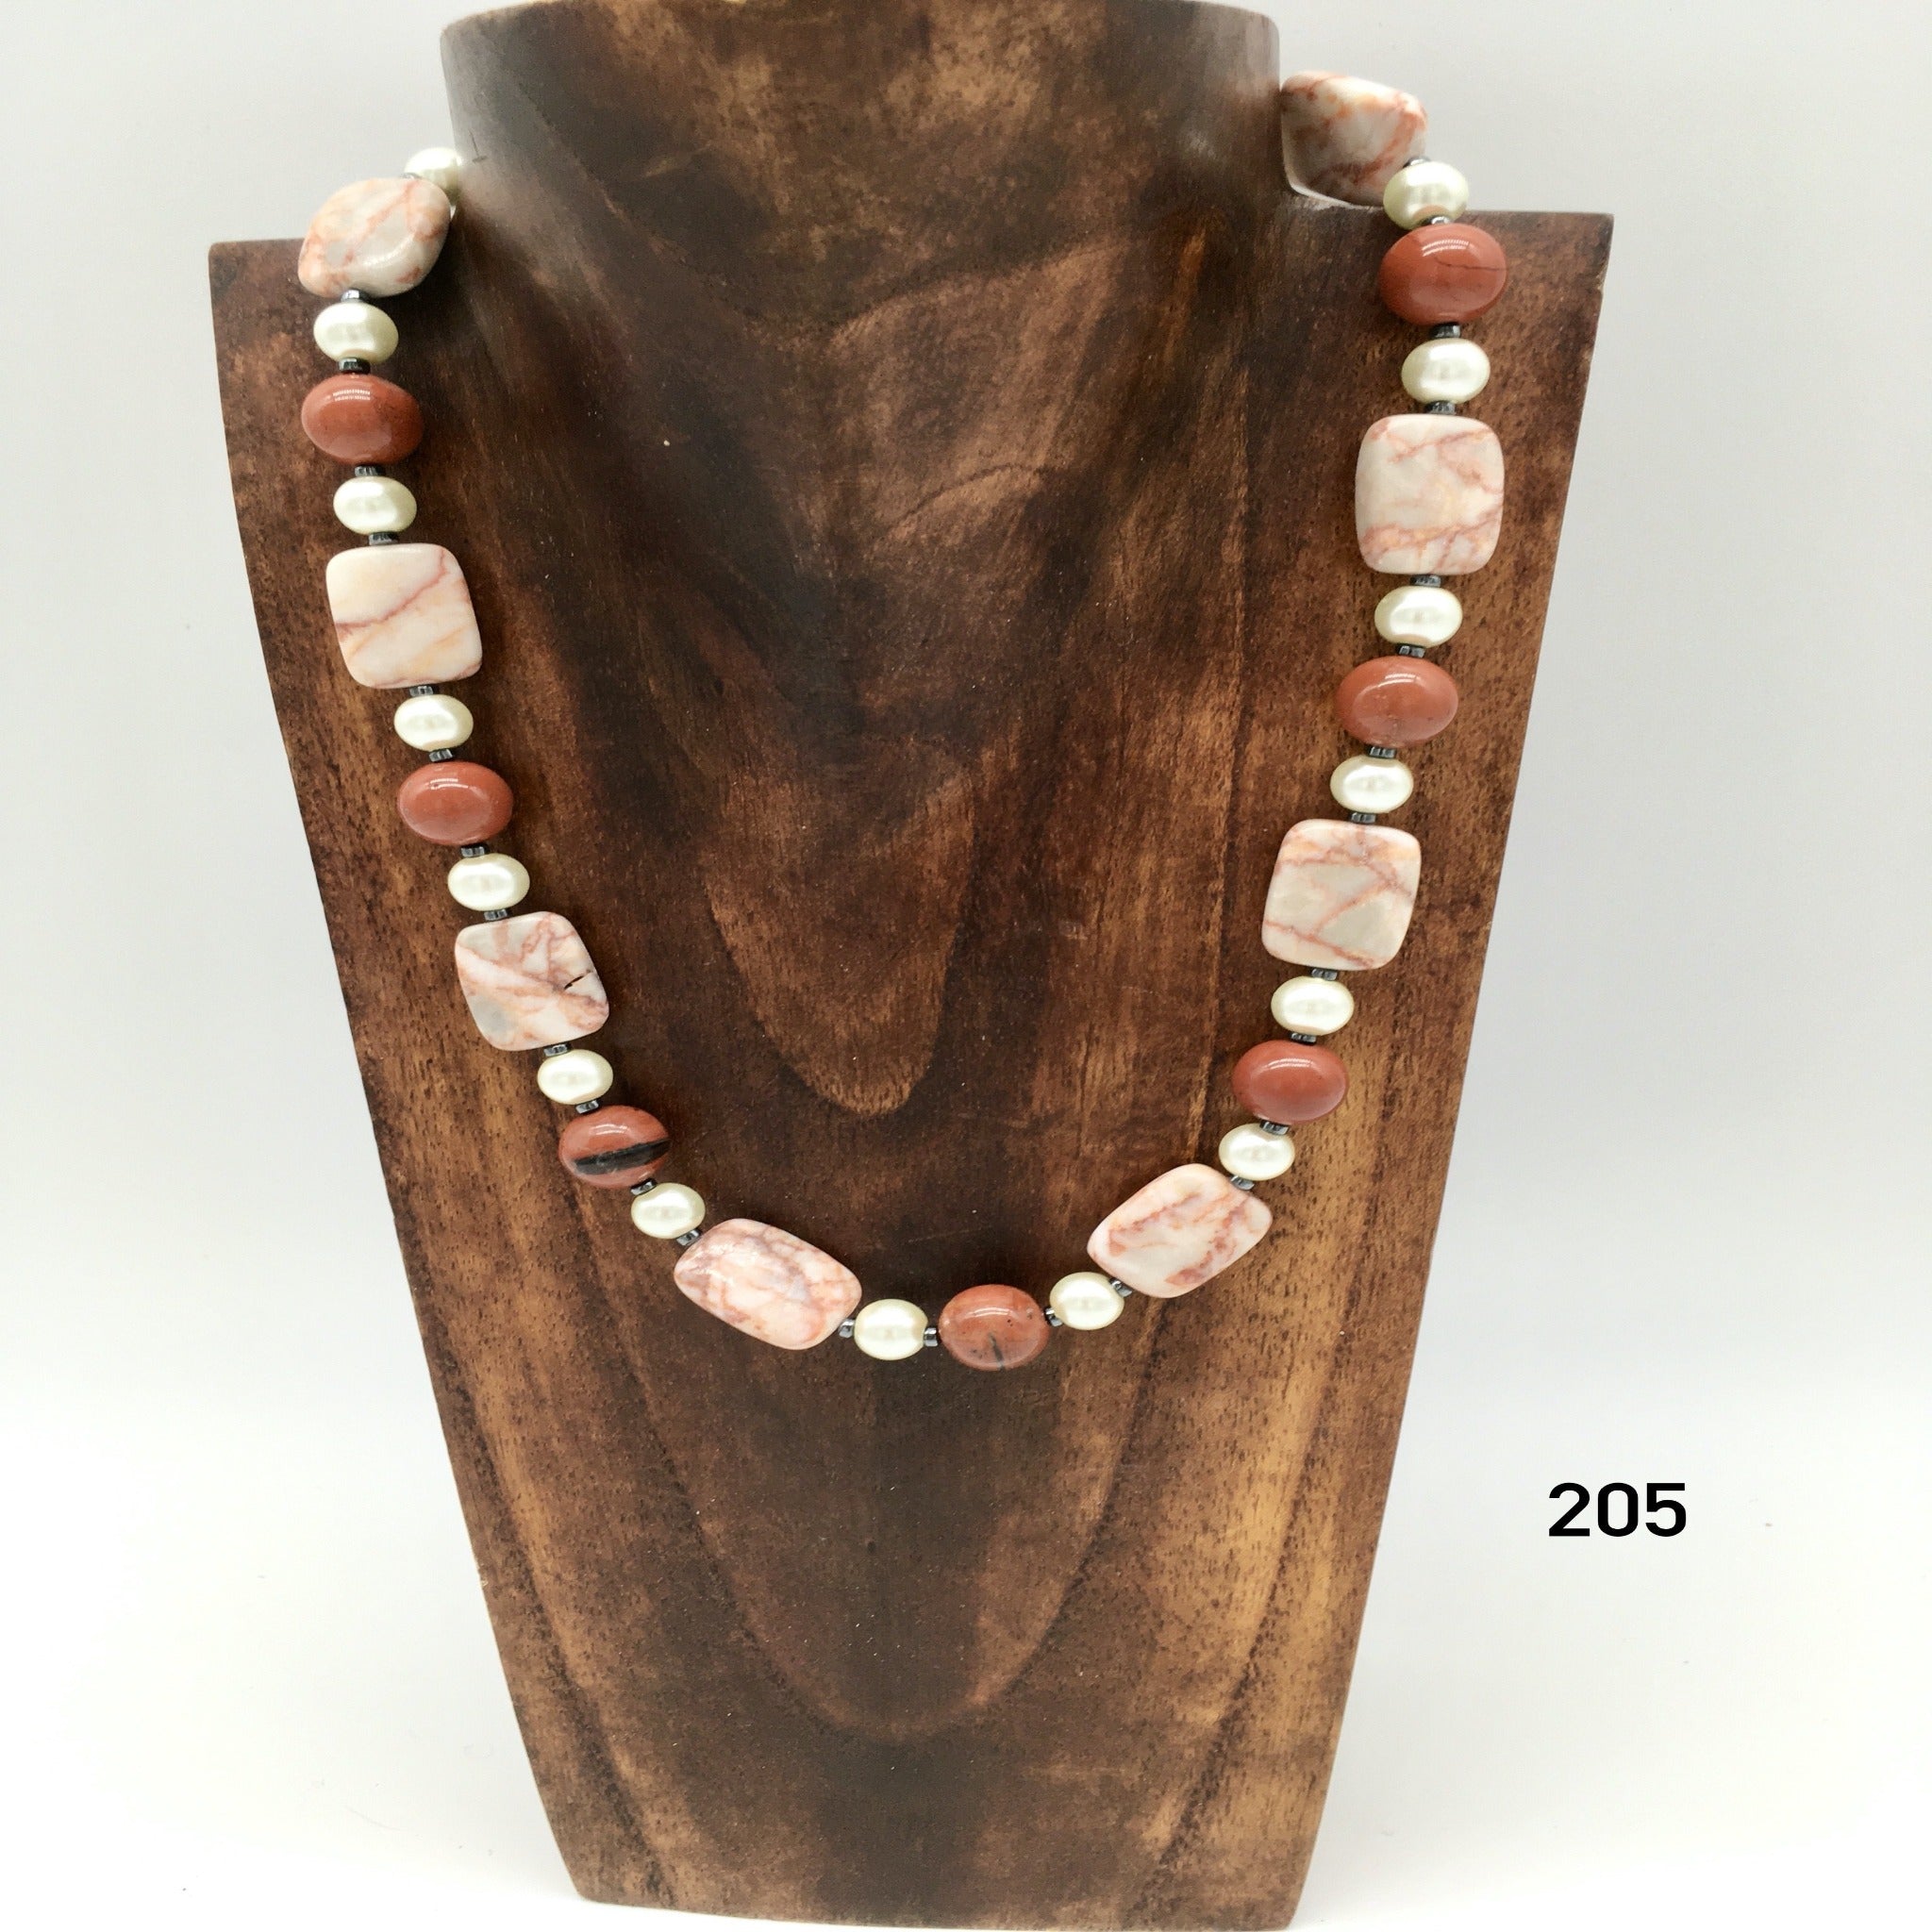 Marble, red jasper, hematite, glass pearls by Dorothea Drew Designs of Central NJ